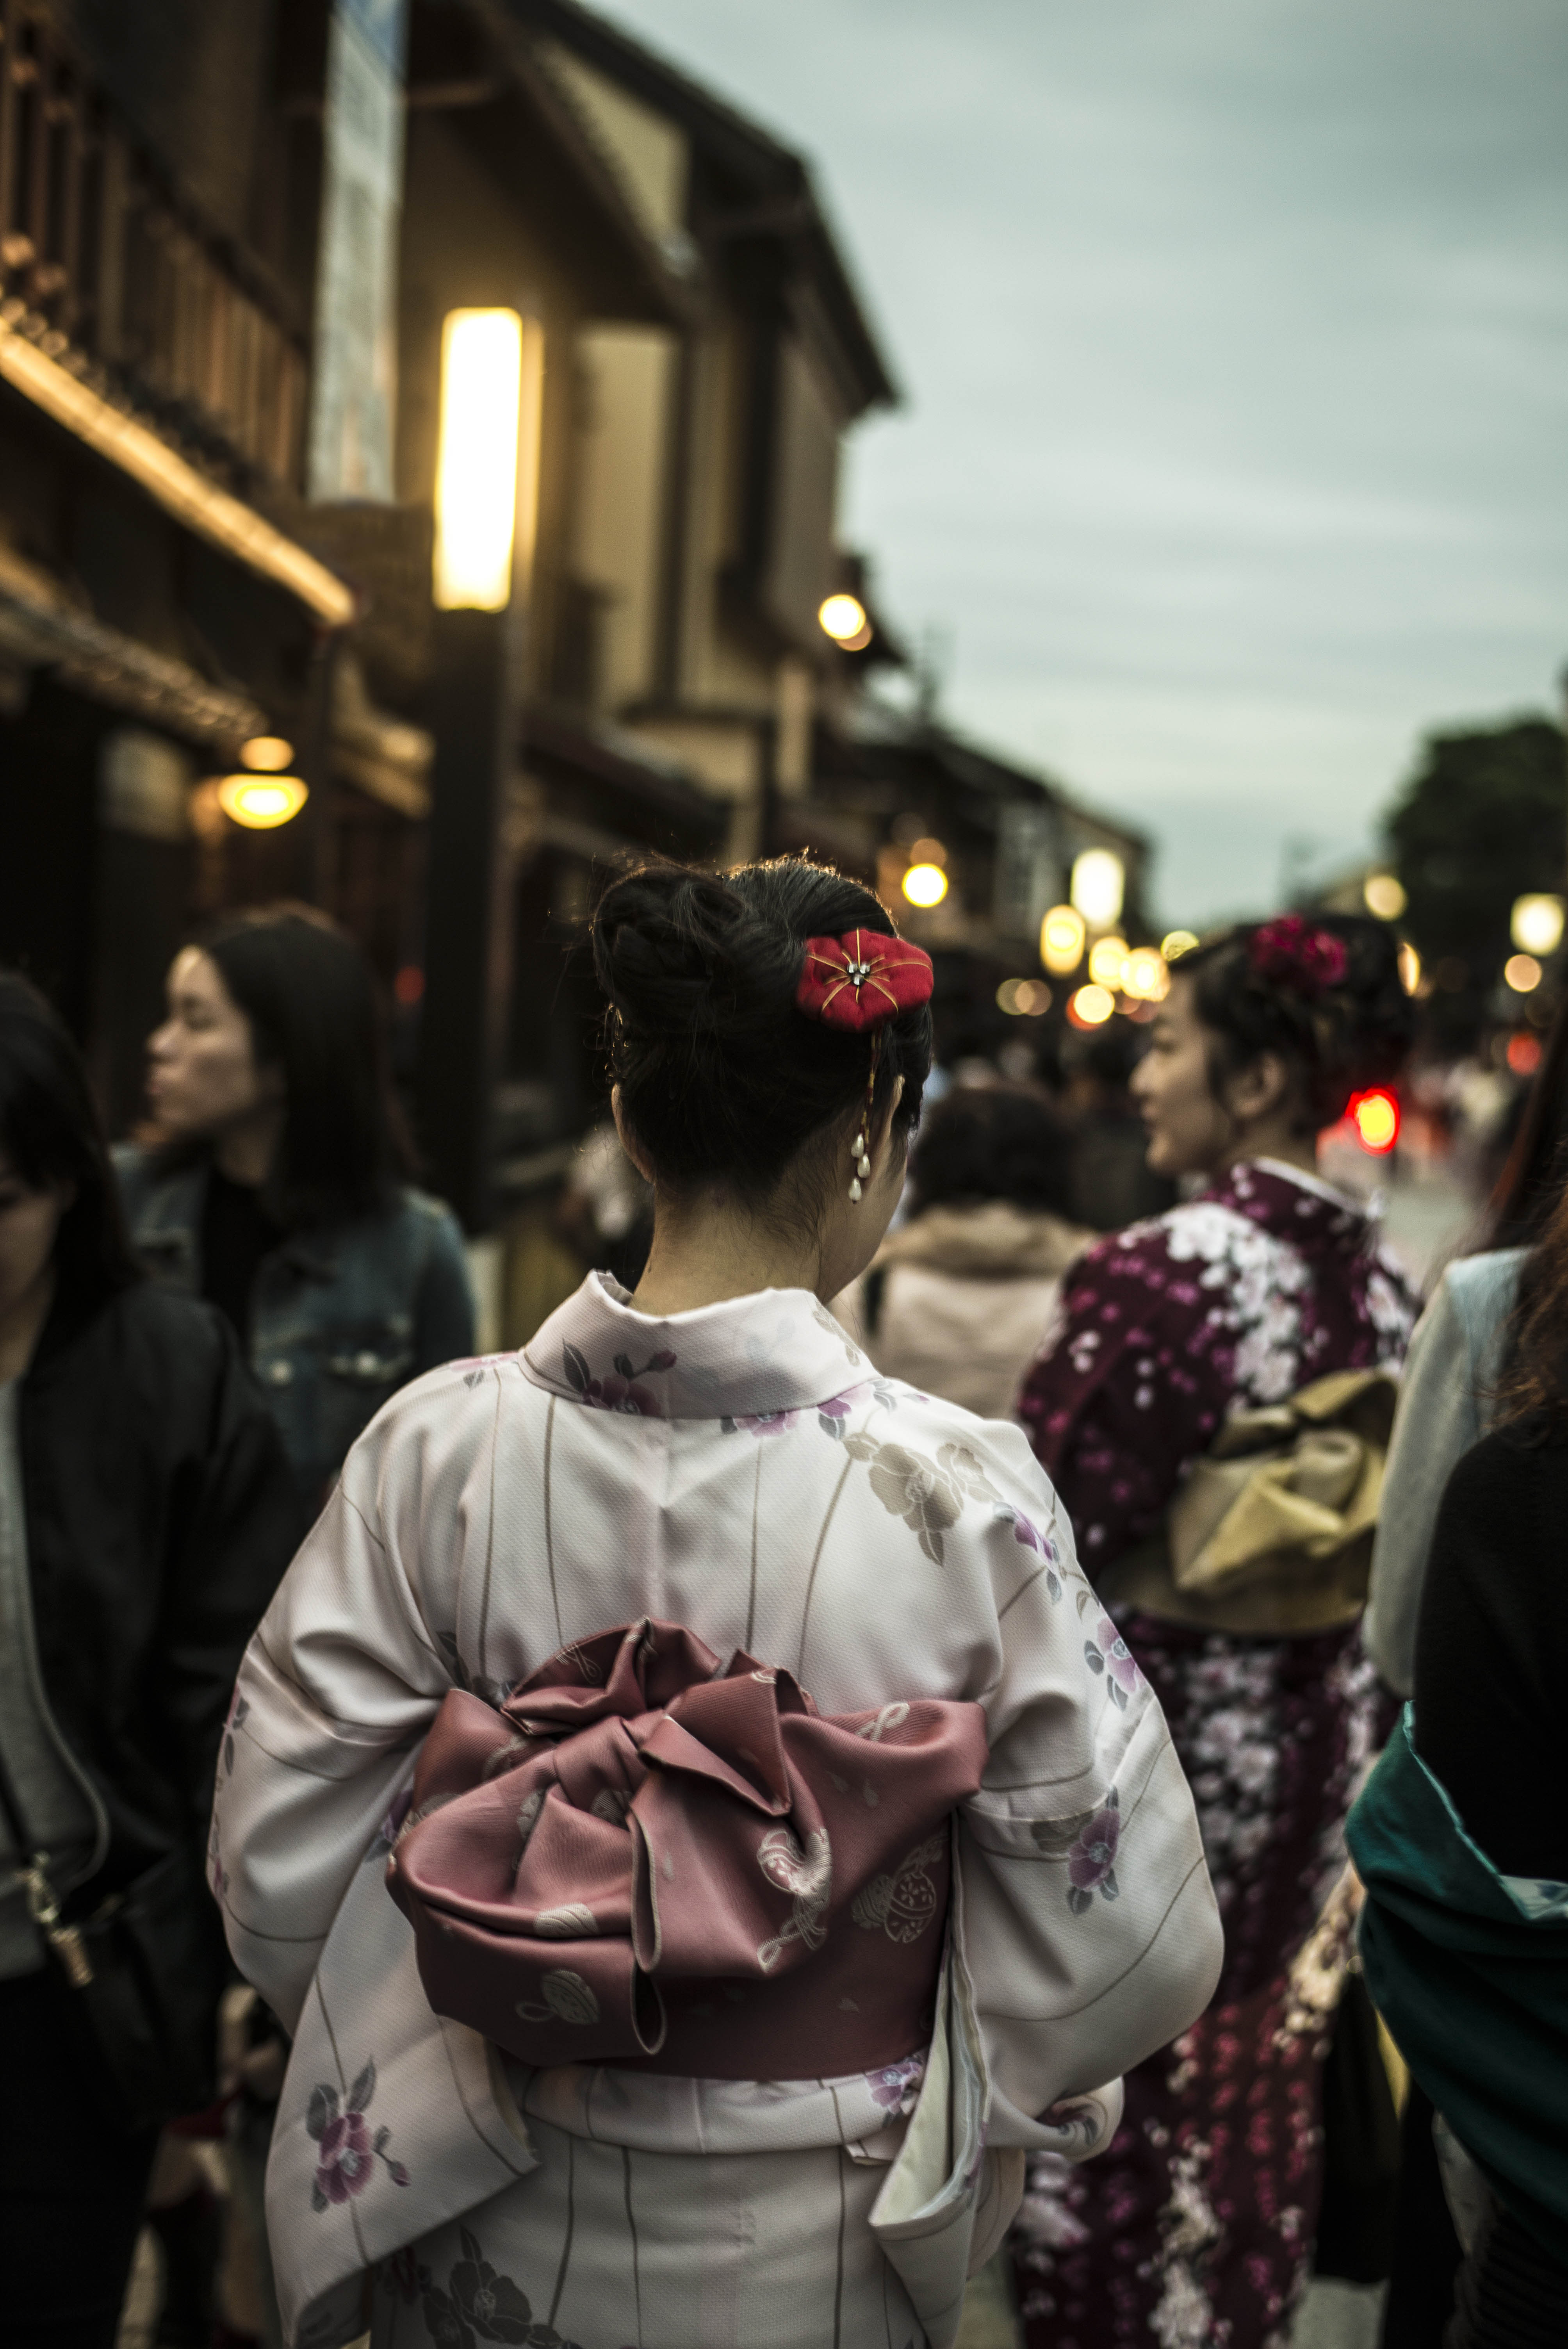 The Gion district of Kyoto finds a mingling of geishas and young women playing dress-up in the traditional kimono and headpiece.